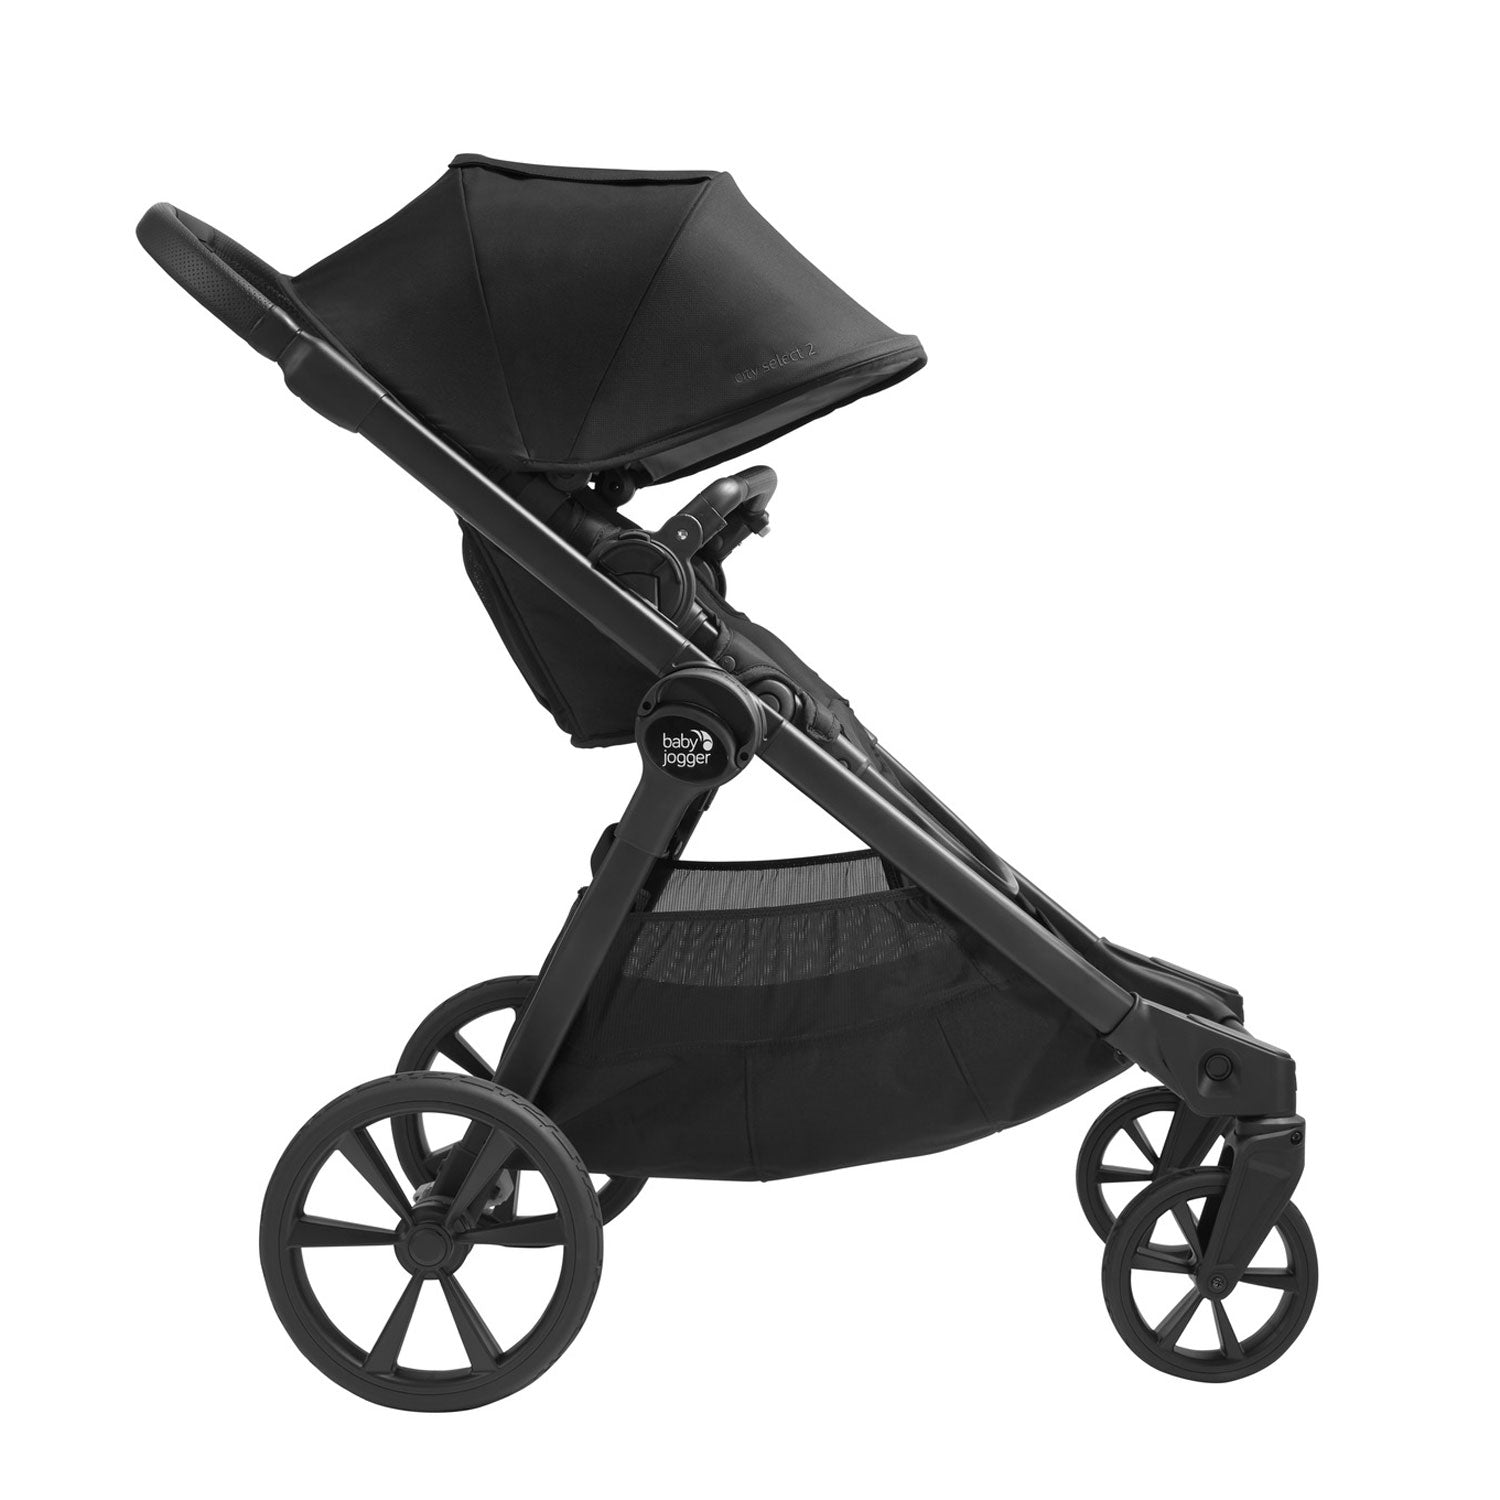 Uenighed skraber Michelangelo Baby Jogger City Select 2 Stroller | The Baby Cubby